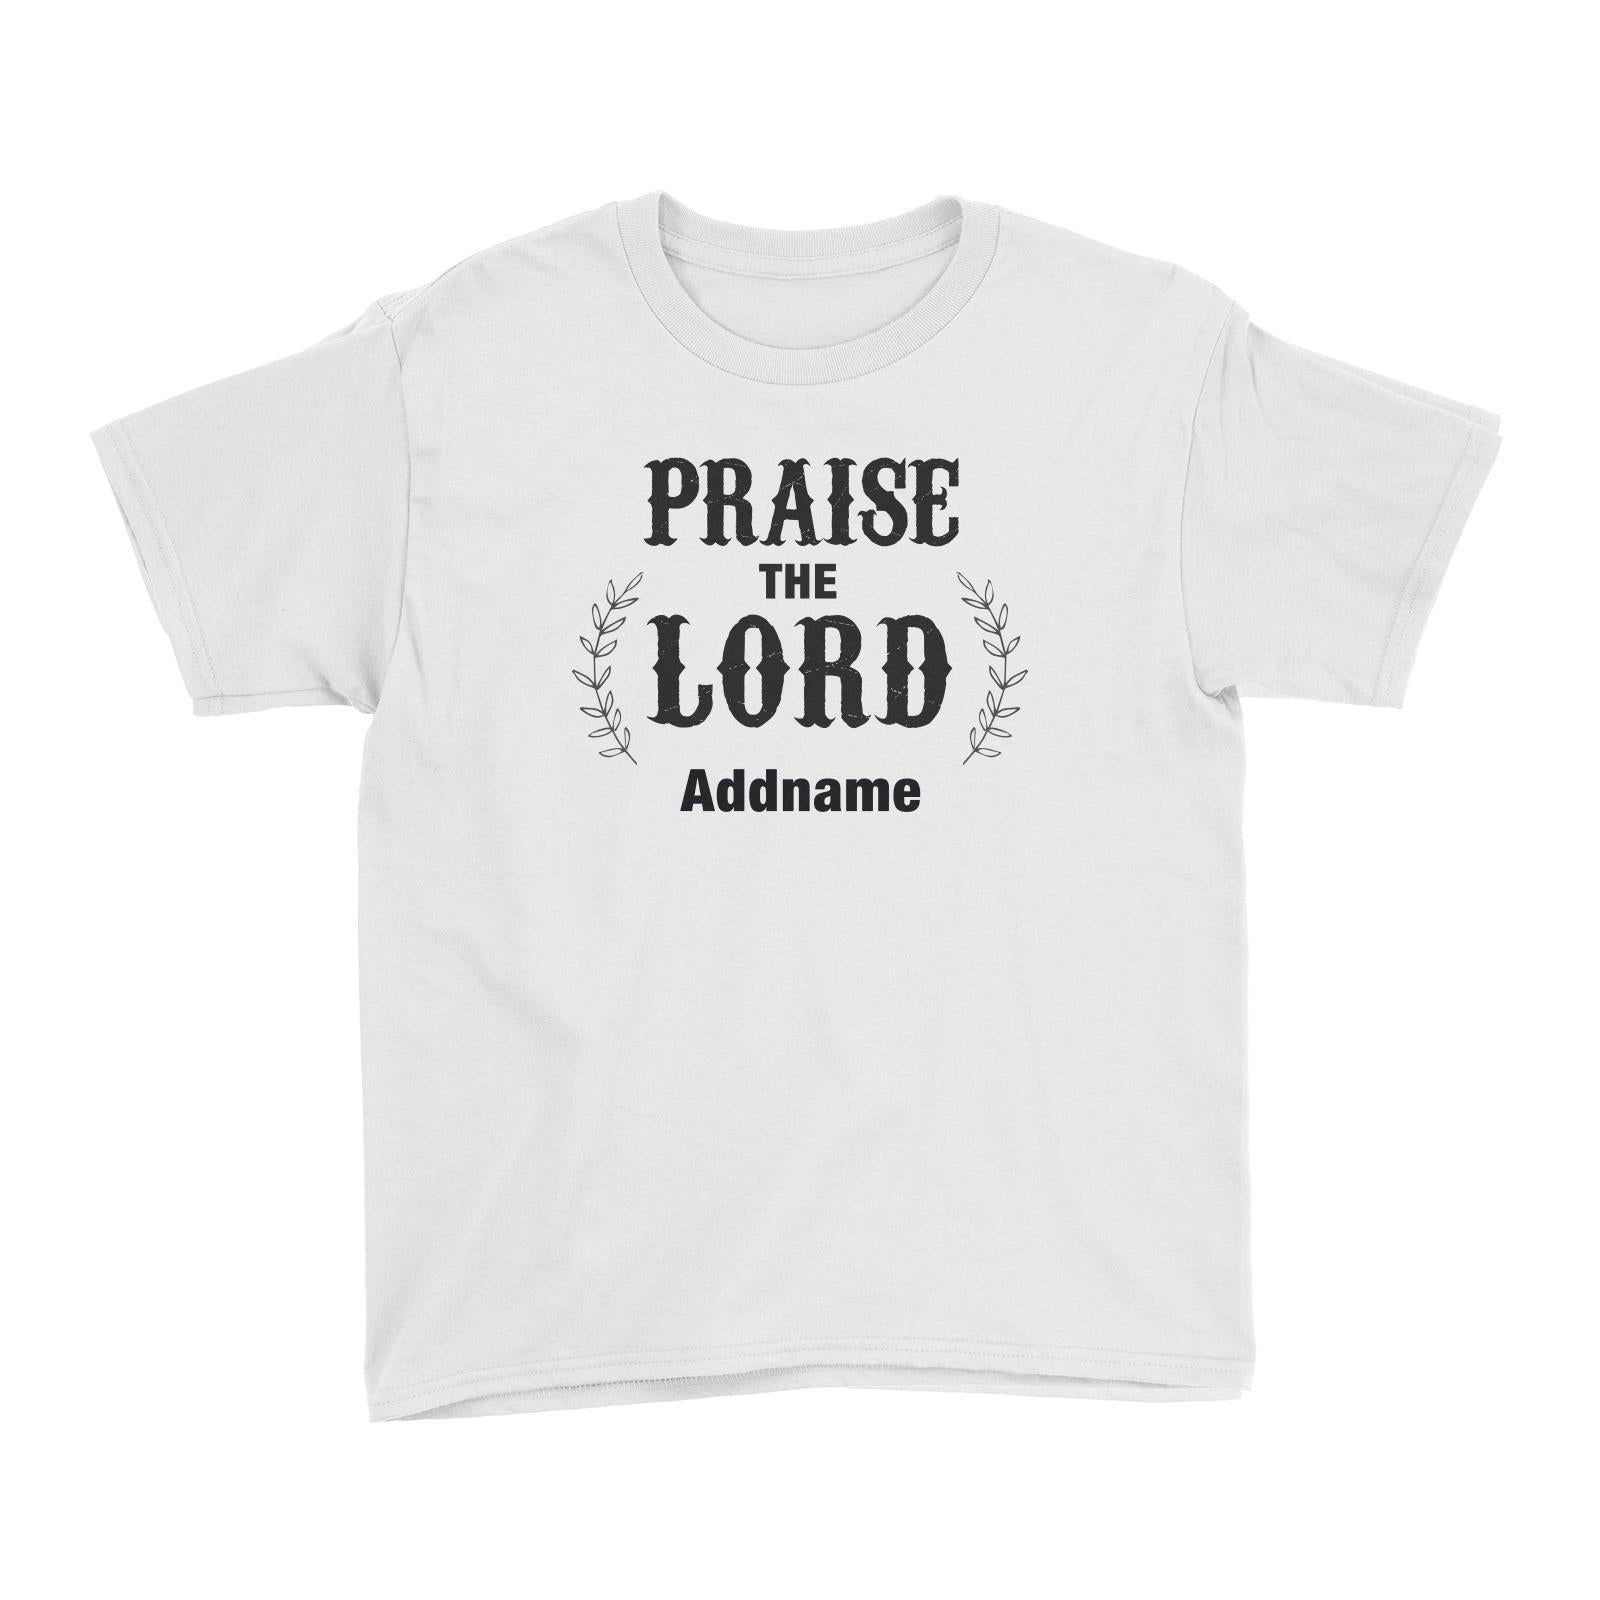 Christian Series Praise The Lord Addname Kid's T-Shirt